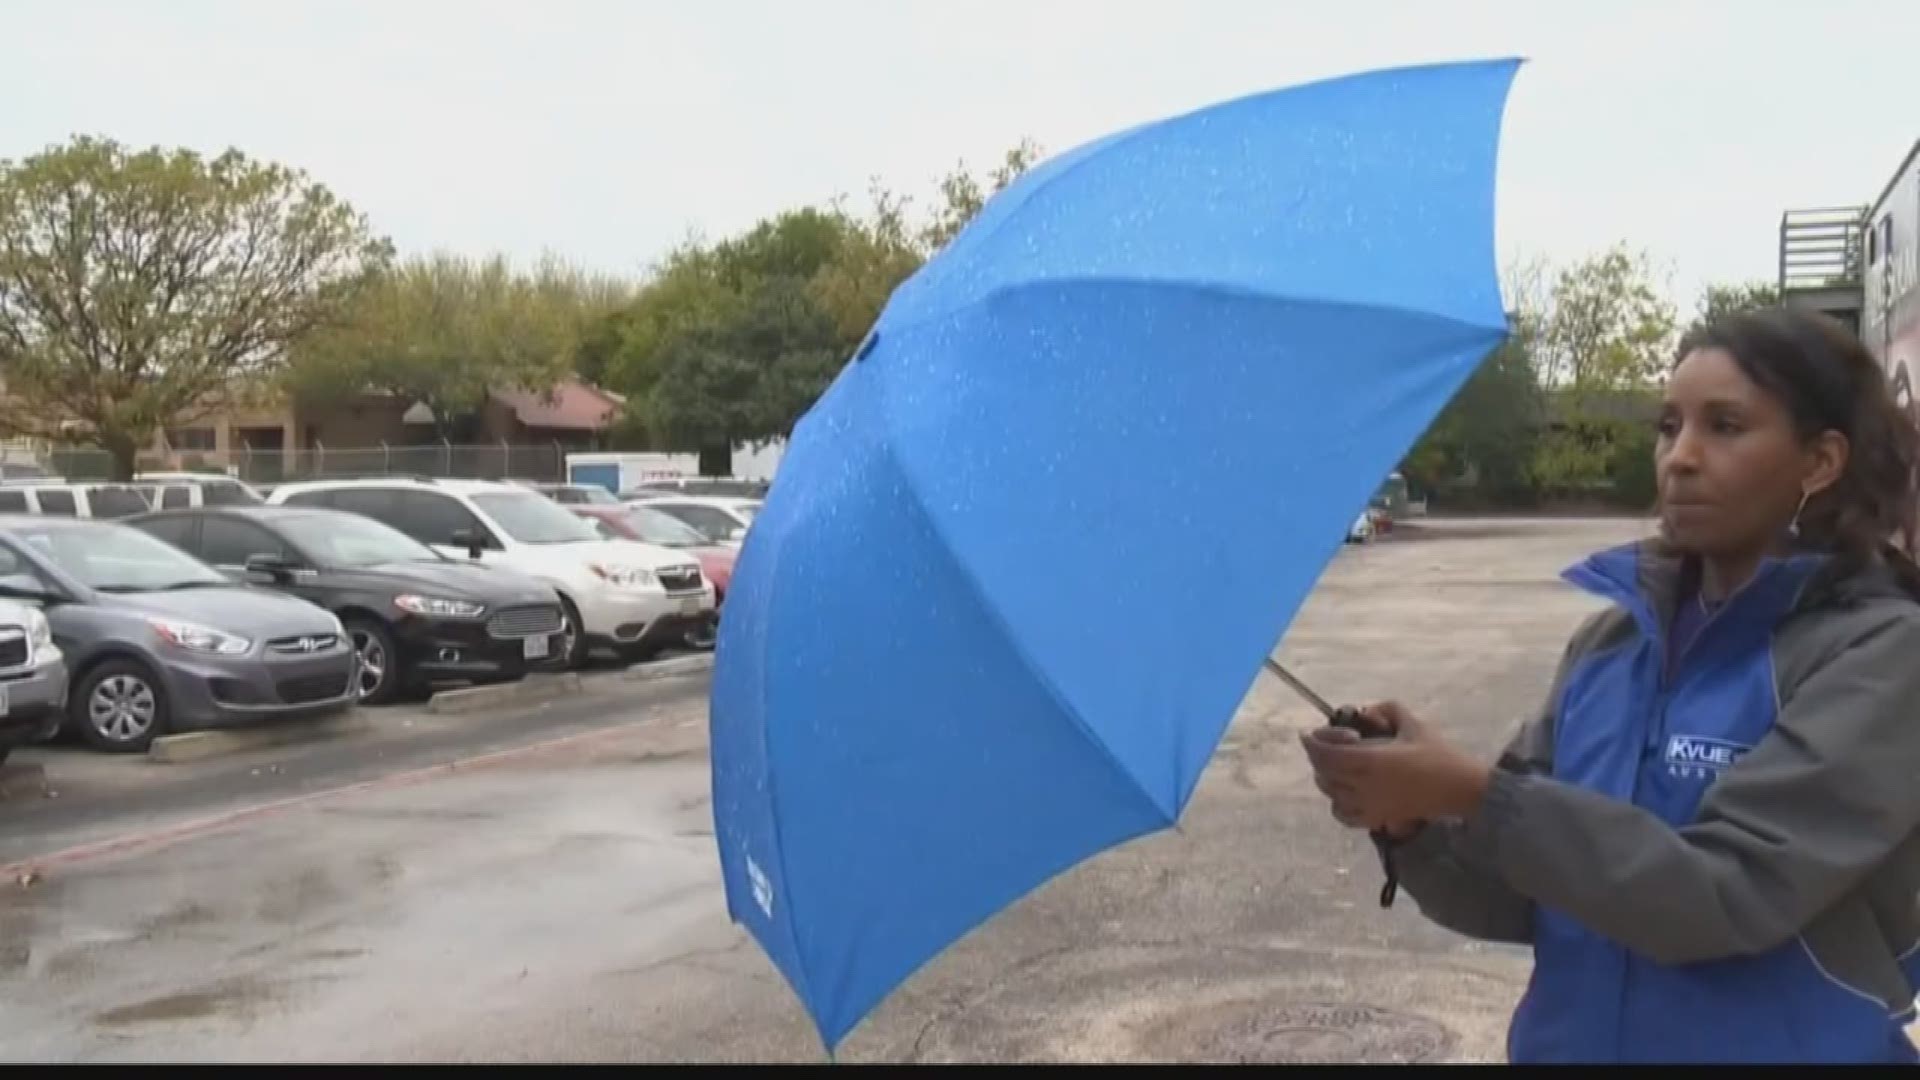 2 Test: Can The Backwards Umbrella Keep You Dry? Our news partners in Texas test it out.